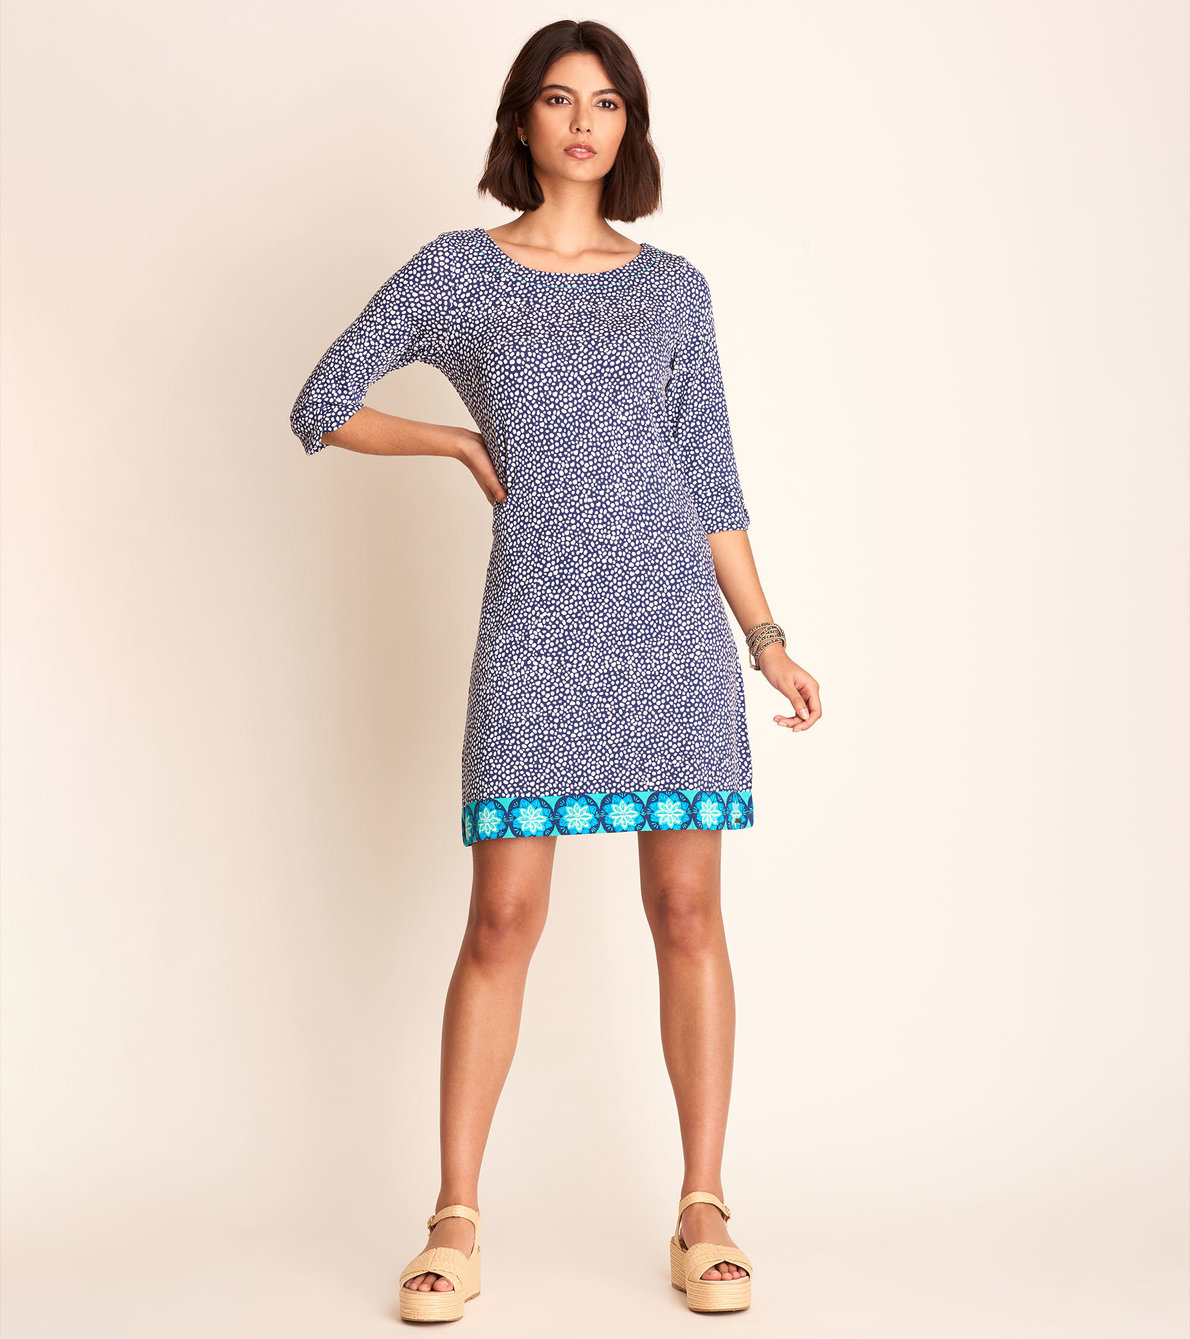 View larger image of Lucy Dress - Blue Micro dots